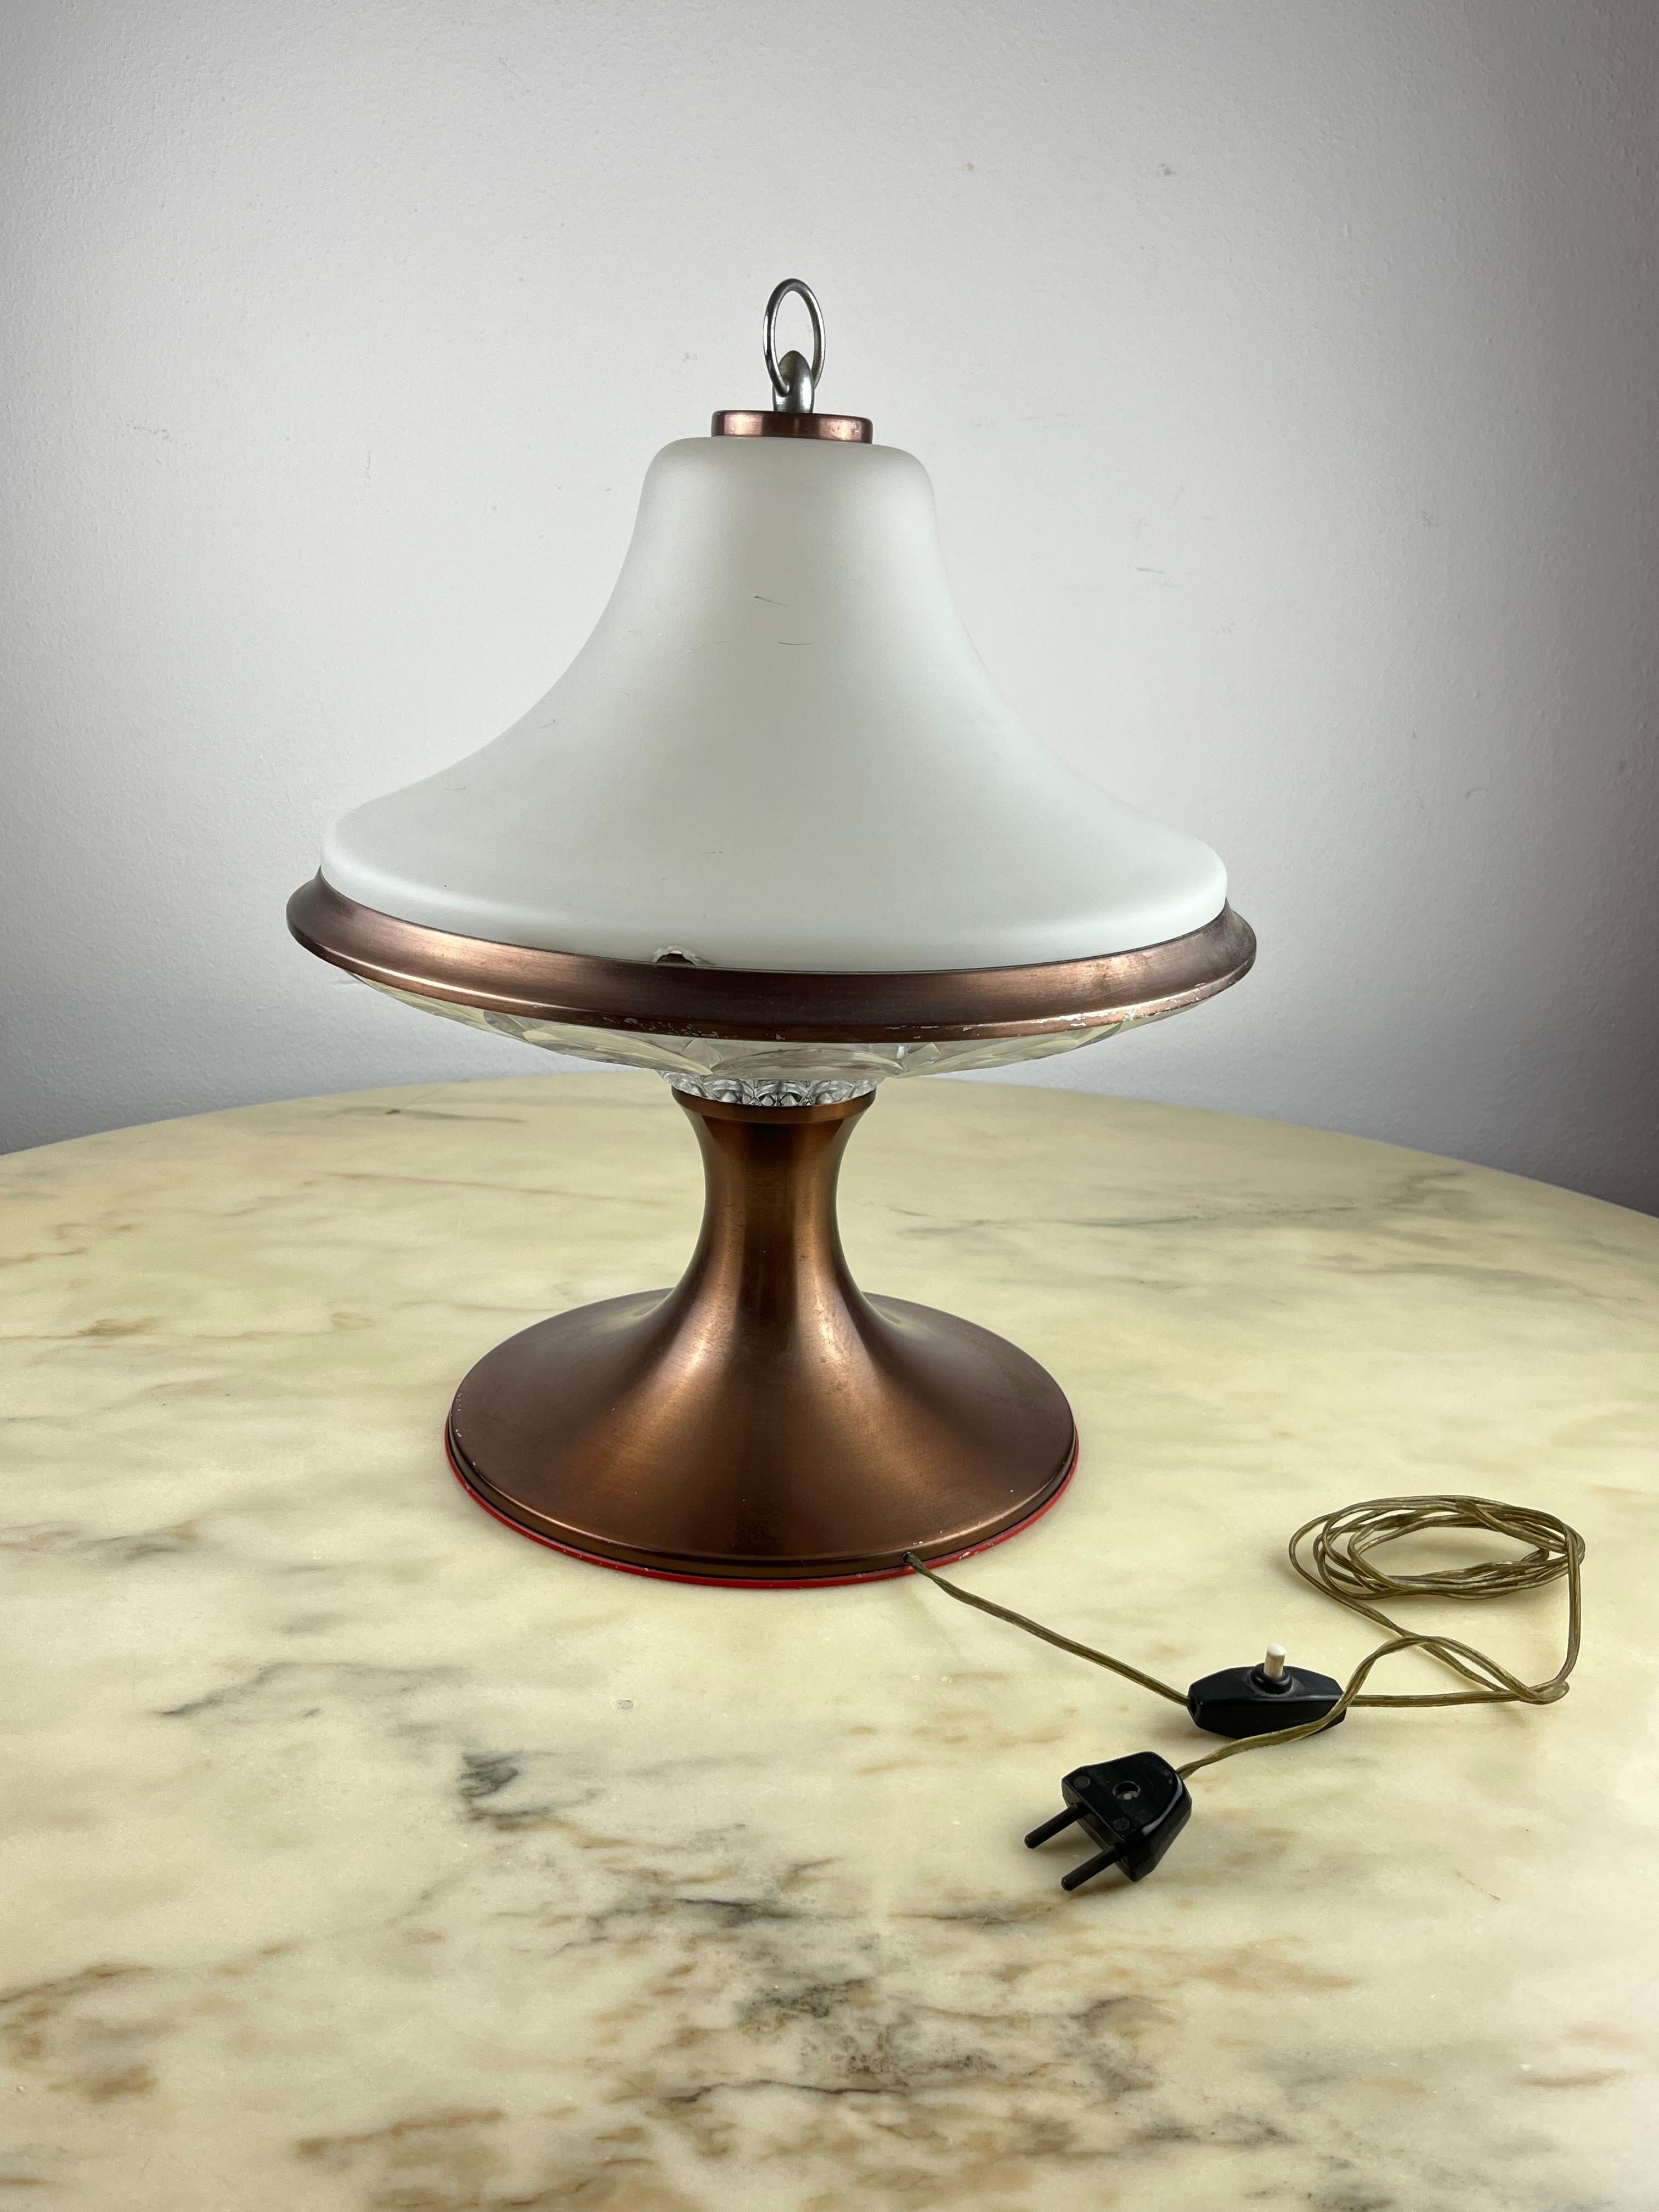 Murano Glass Table Lamp, Italy, 1960s For Sale 2